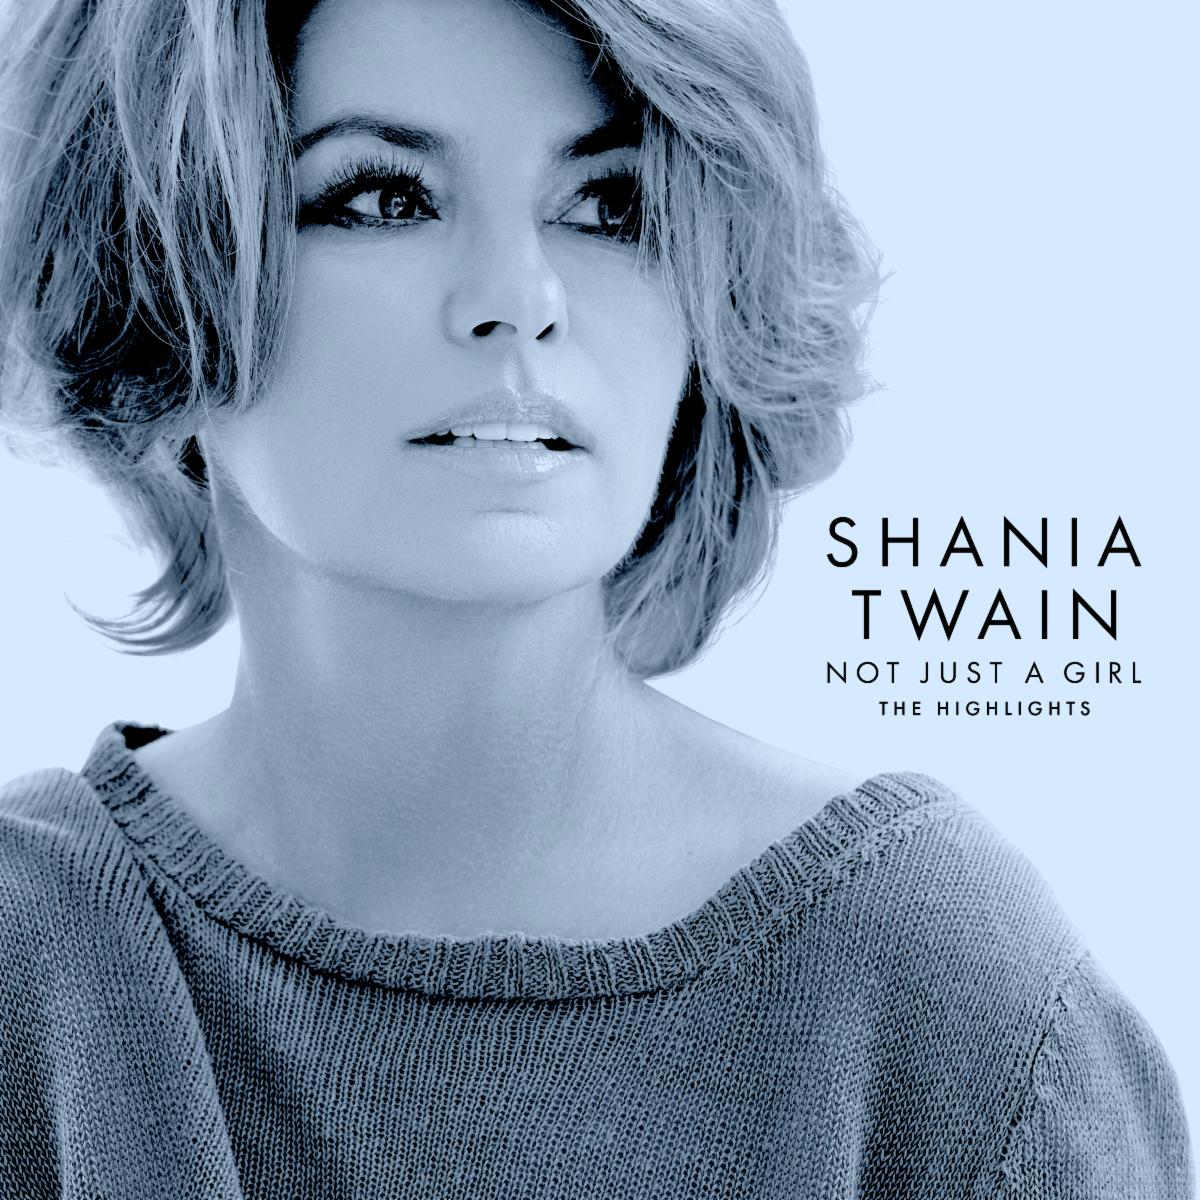 Shania Twain: Not Just A Girl Documentary on Netflix With Accompanying Highlights Album Releasing July 26